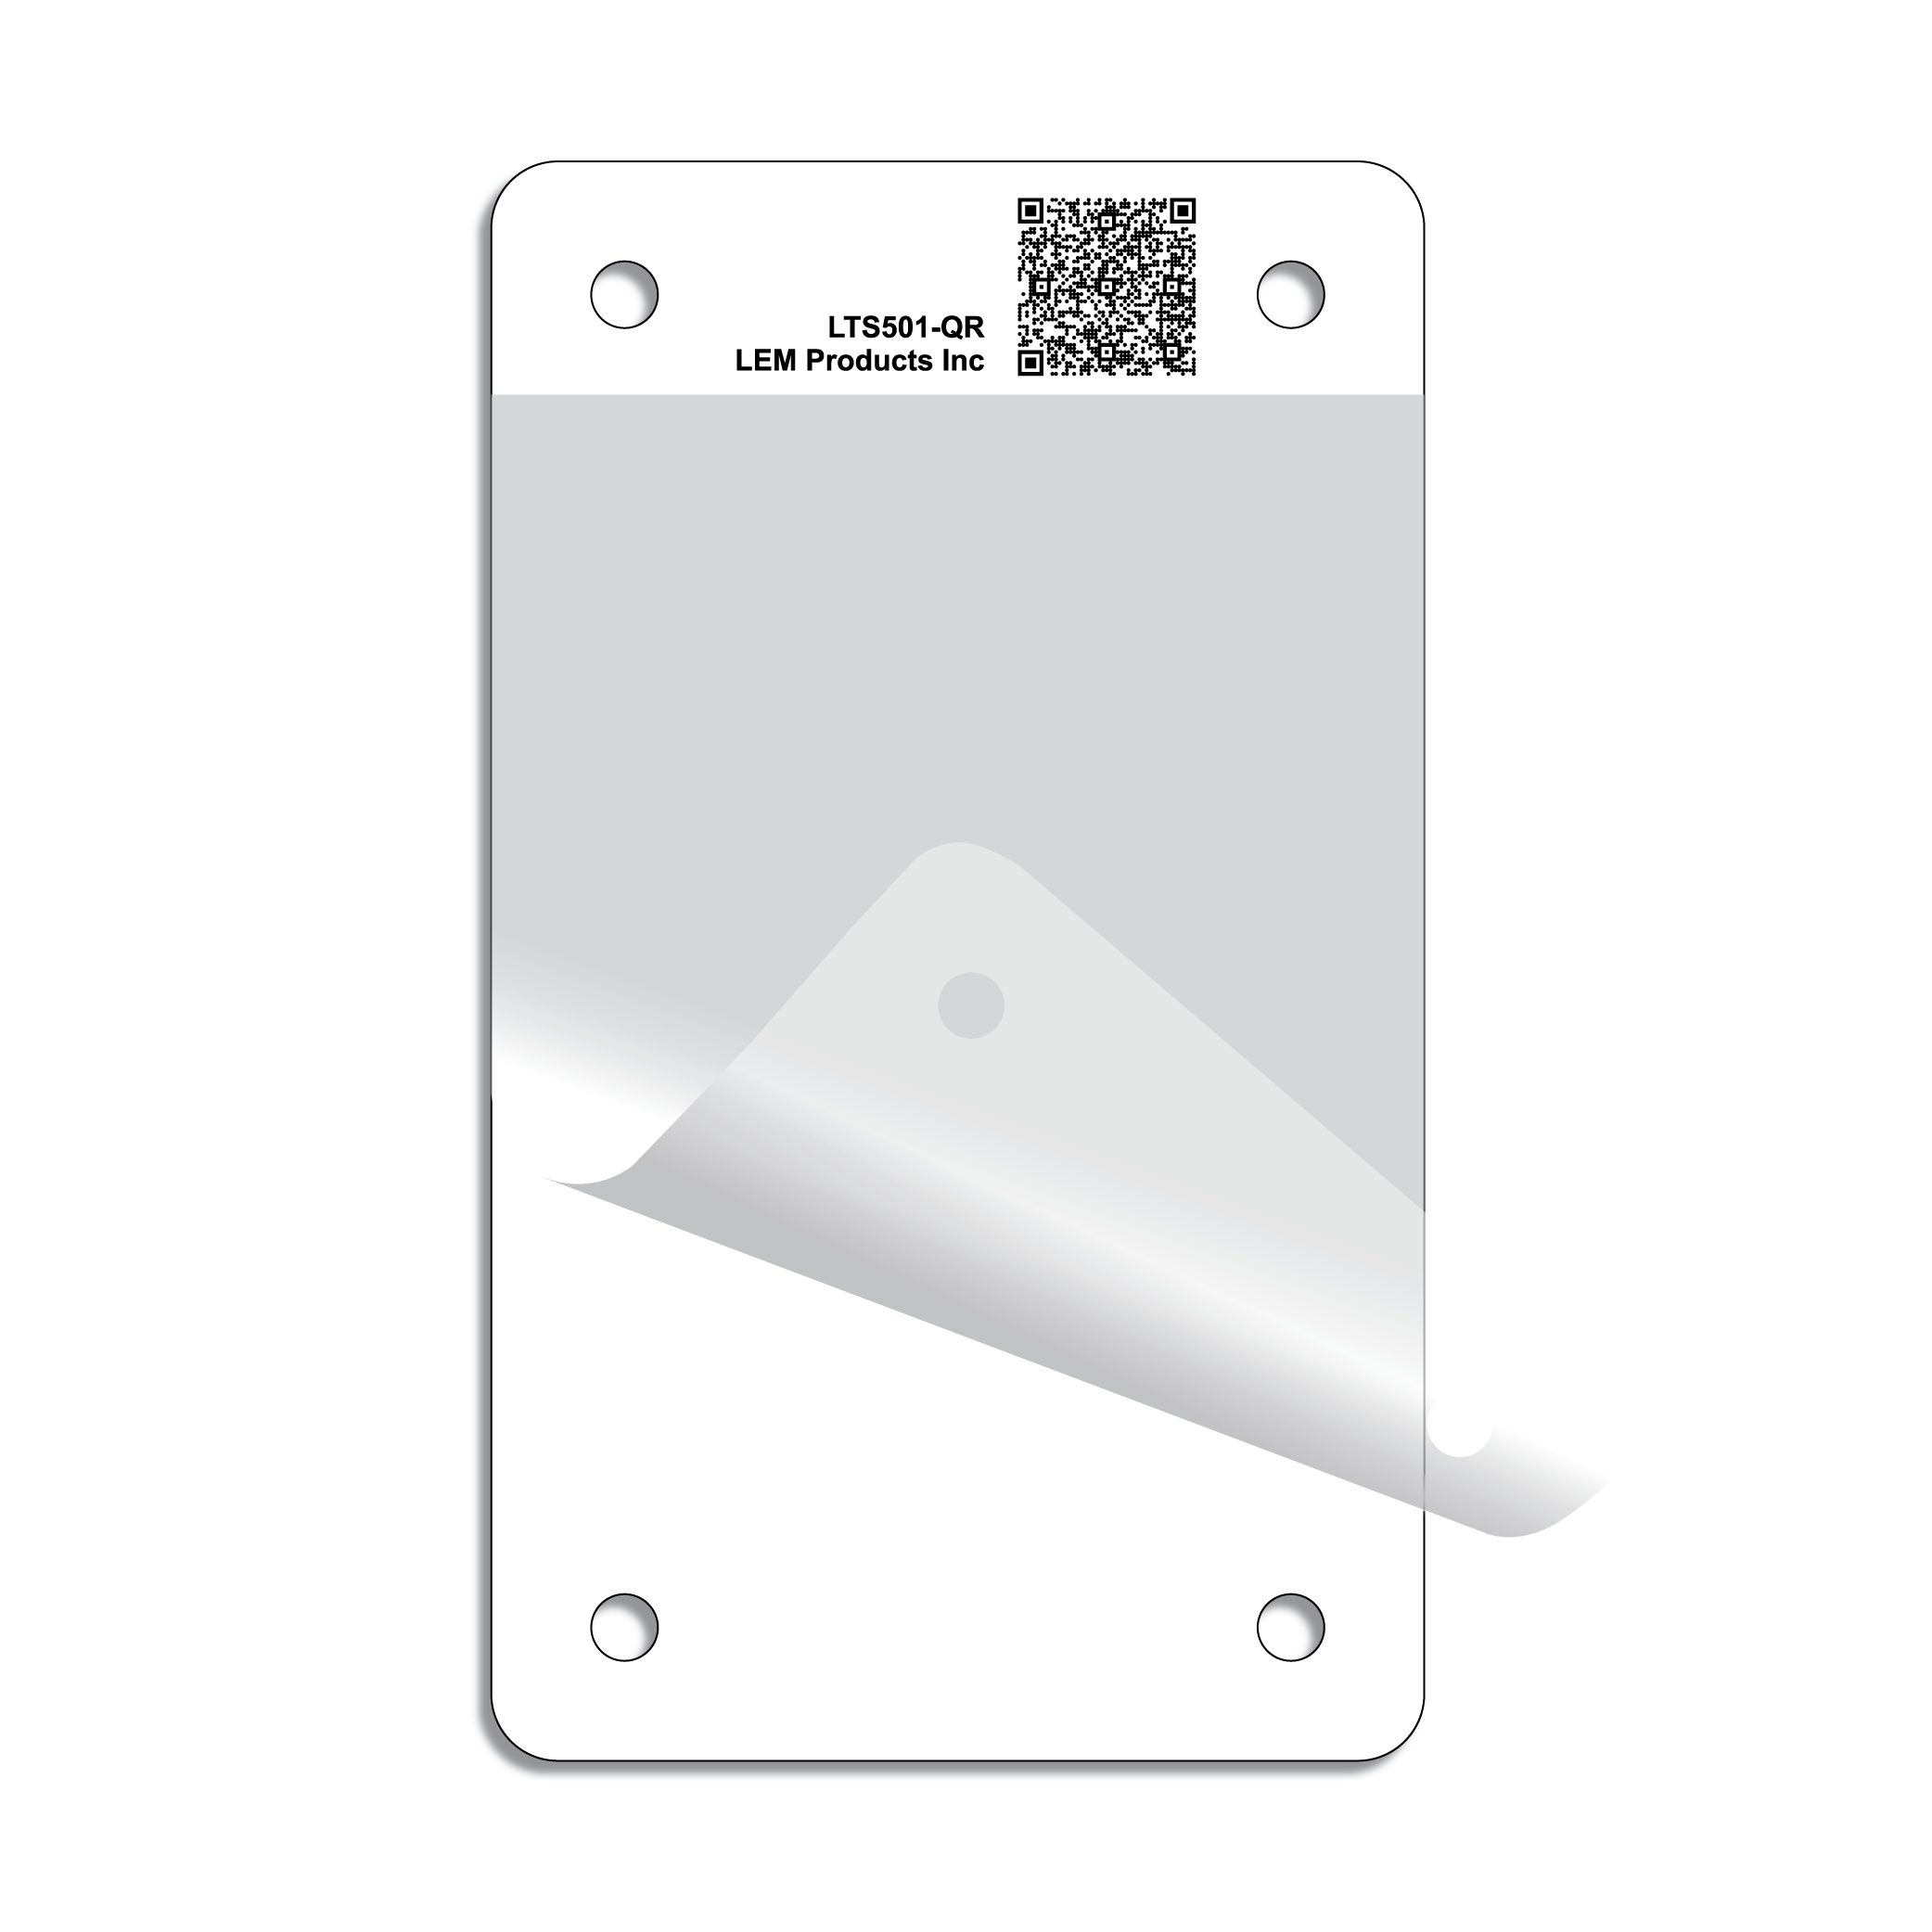 A blank plastic tag with a clear, self-laminating cover and four grommet holes. Color: White.